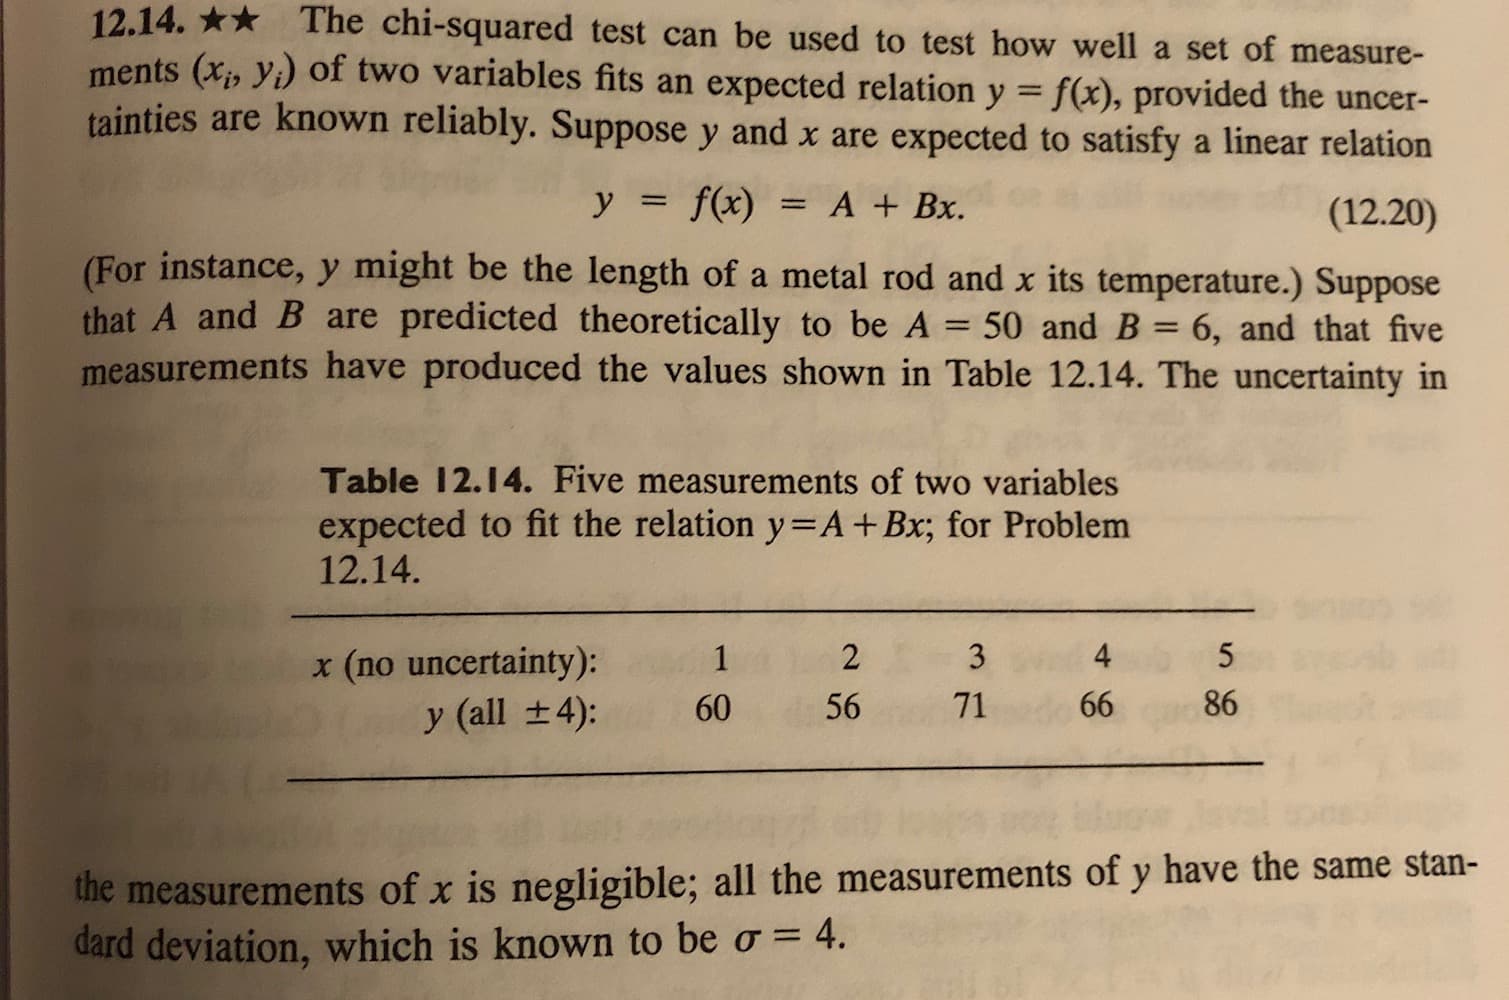 12.14.
The chi-squared test can be used to test how well a set of measure-
ments (xi, yi) of two variables fits an expected relation y f(x), provided the uncer-
tainties are known reliably. Suppose y and x are expected to satisfy a linear relation
y = f(x)=A + Bx.
(12.20)
(For instance, y might be the length of a metal rod and x its temperature.) Suppose
that A and B are predicted theoretically to be A 50 and B
6, and that five
measurements have produced the values shown in Table 12.14. The uncertainty in
Table 12.14. Five measurements of two variables
expected to fit the relation y-A + Bx; for Problem
12.14.
4
5
2
x (no uncertainty):
y (all +4):
1
86
66
71
56
60
the measurements of x is negligible; all the measurements of y have the same stan-
dard deviation, which is known to be o 4.
